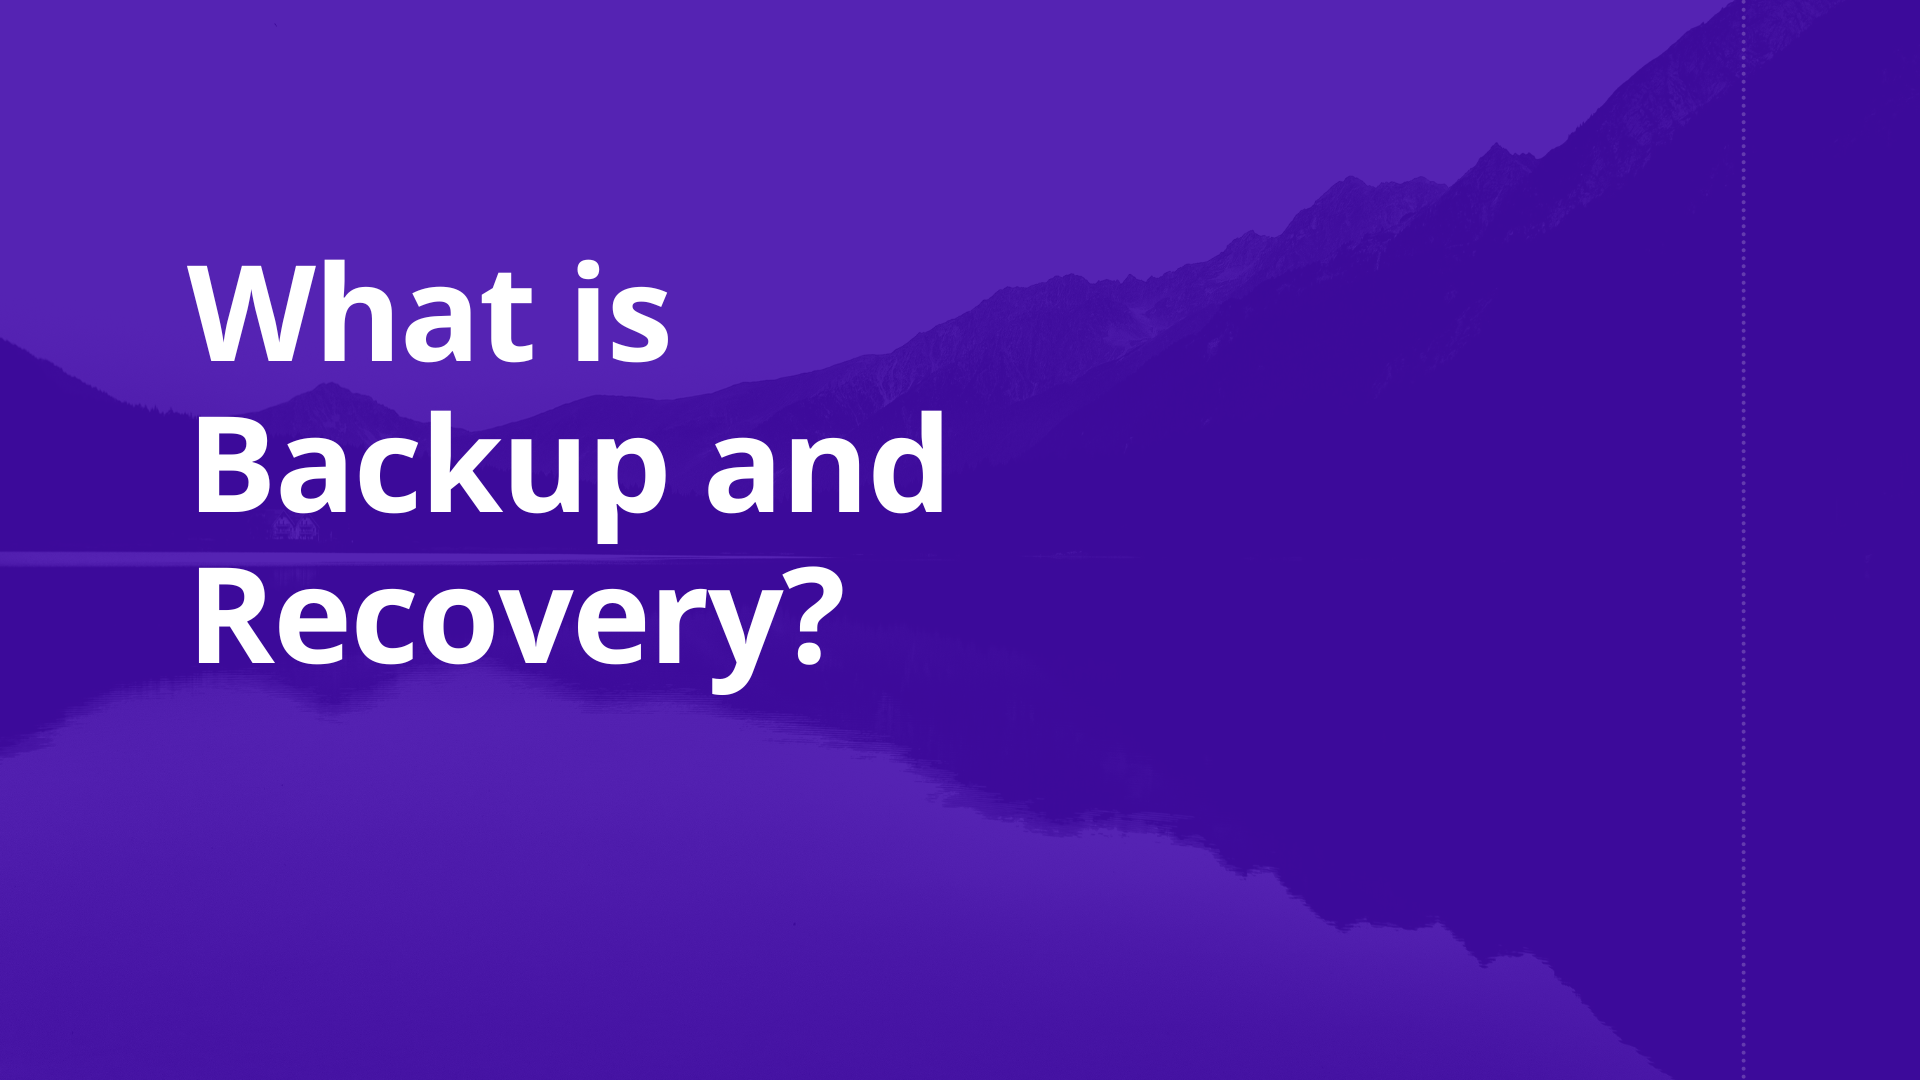 What is Backup and Recovery?